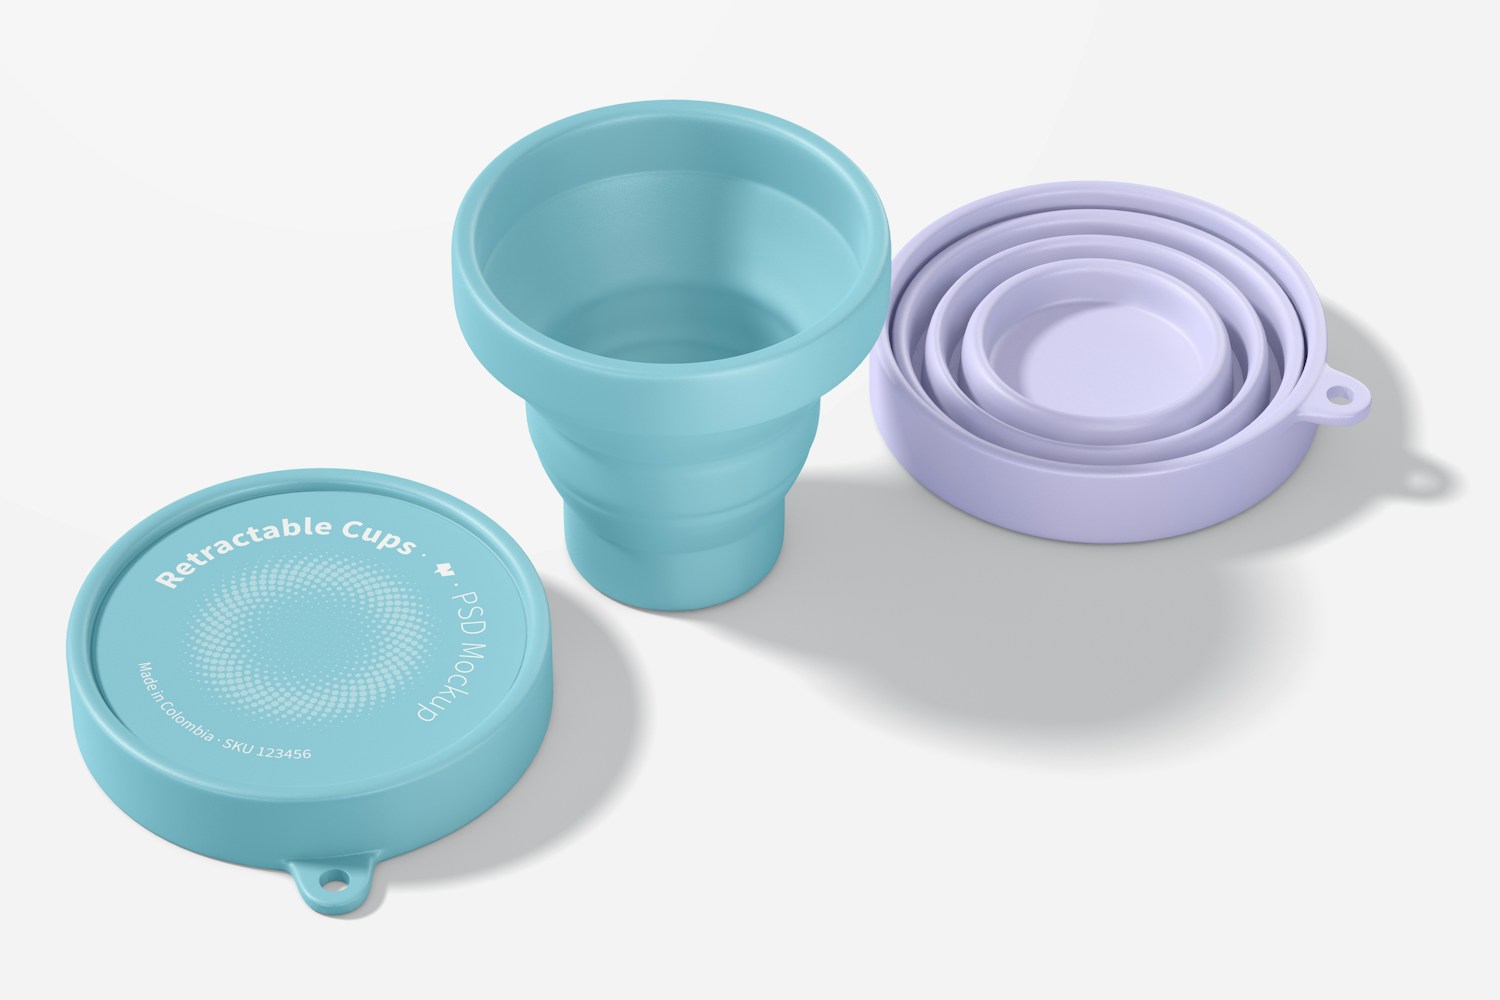 Retractable Cups Mockup, Perspective View